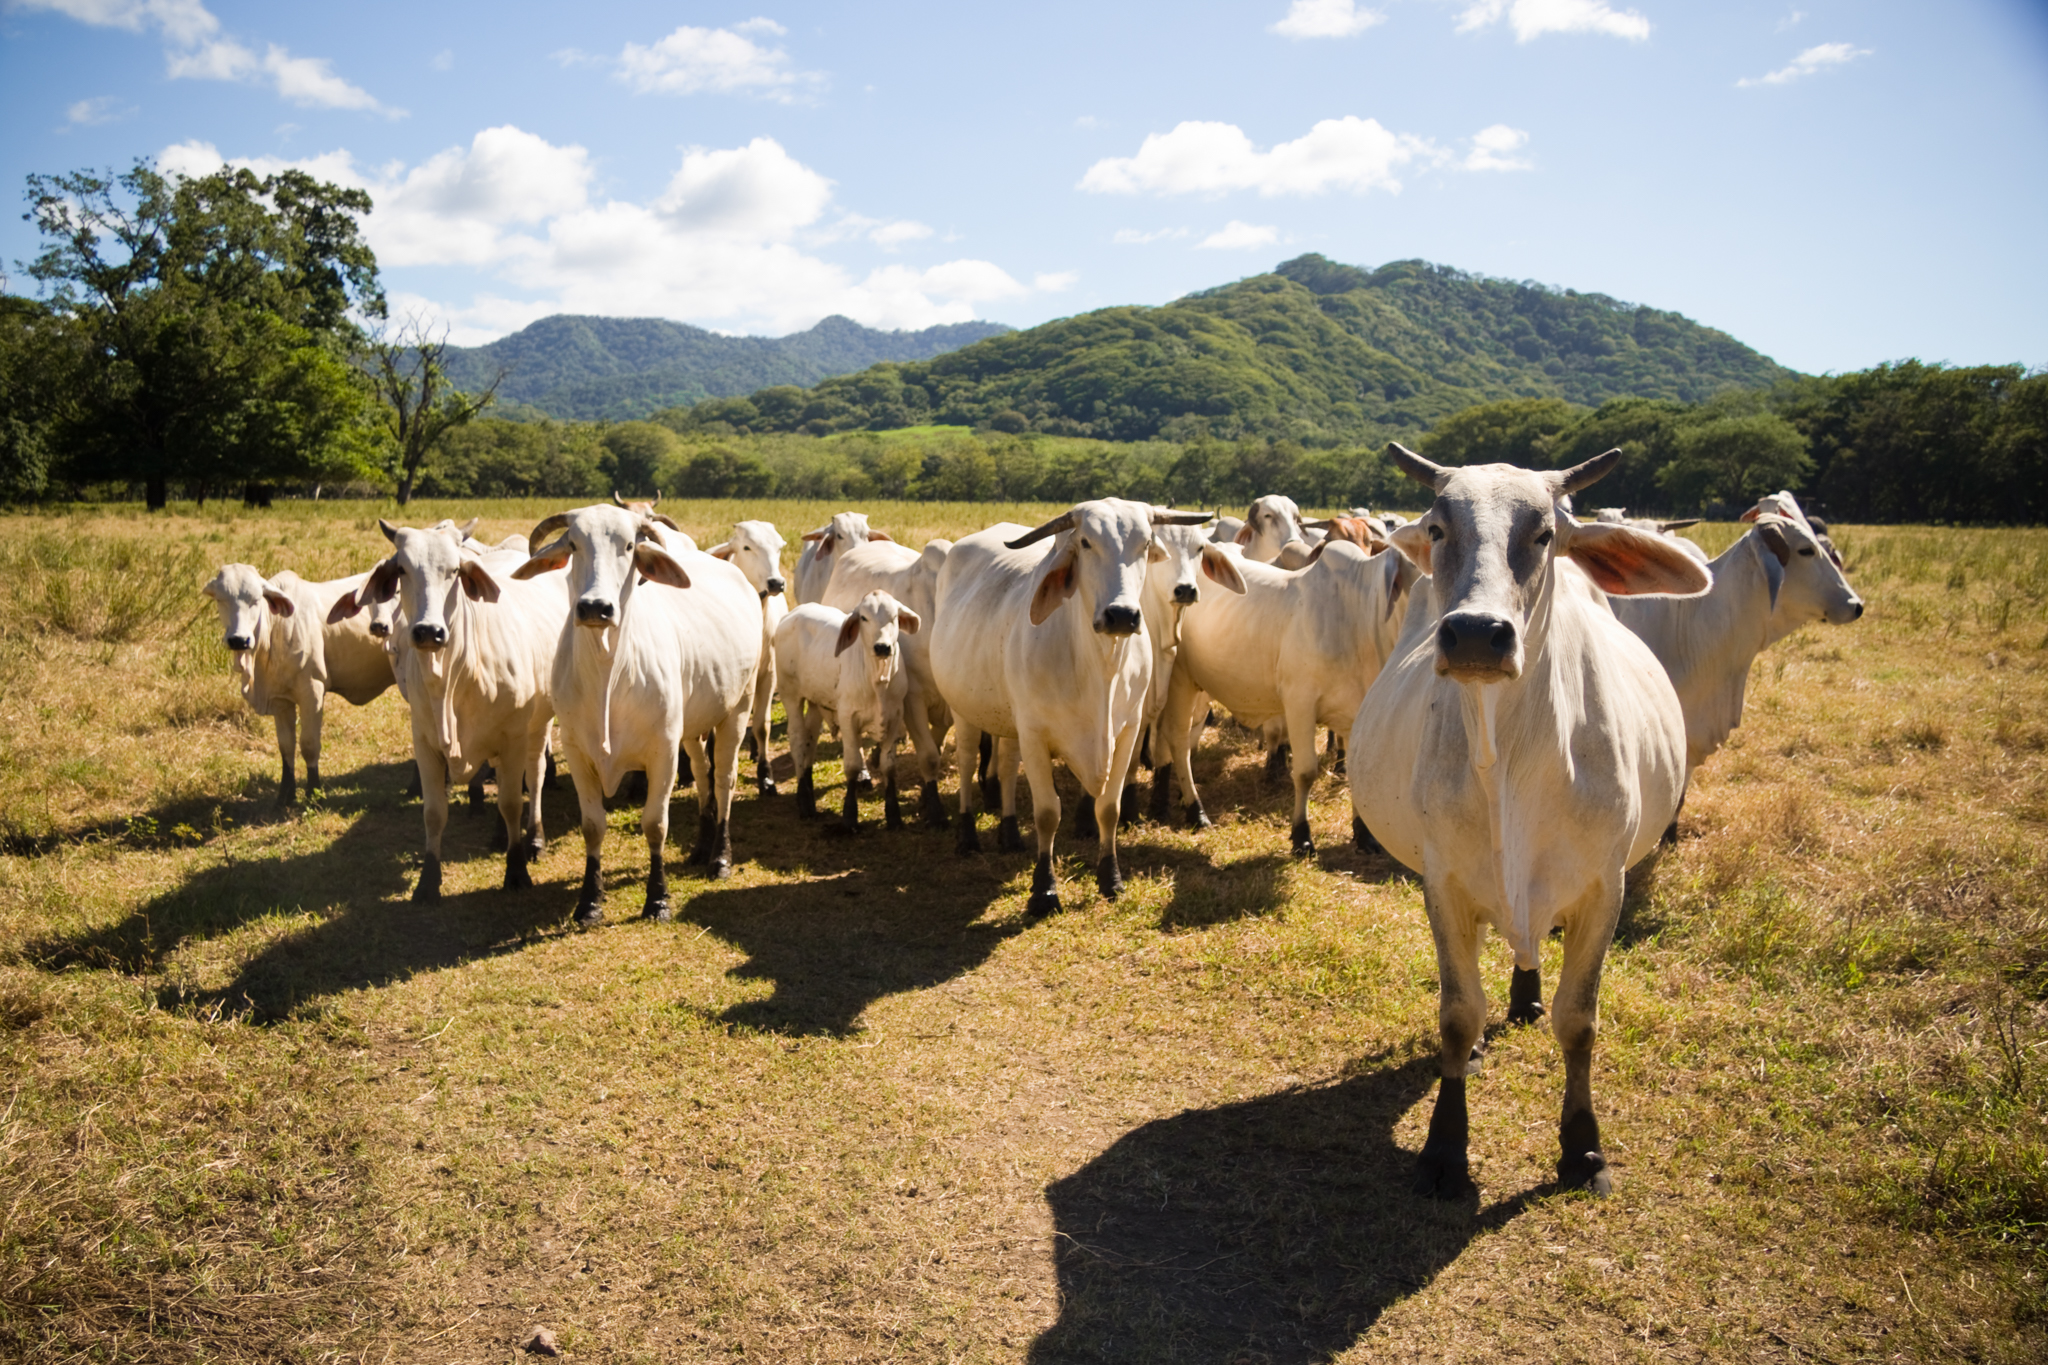 A drive plotted with offline Google Maps took us through beautiful Costa Rican plains. We made a quick stop to greet a herd of Jersey Cows.